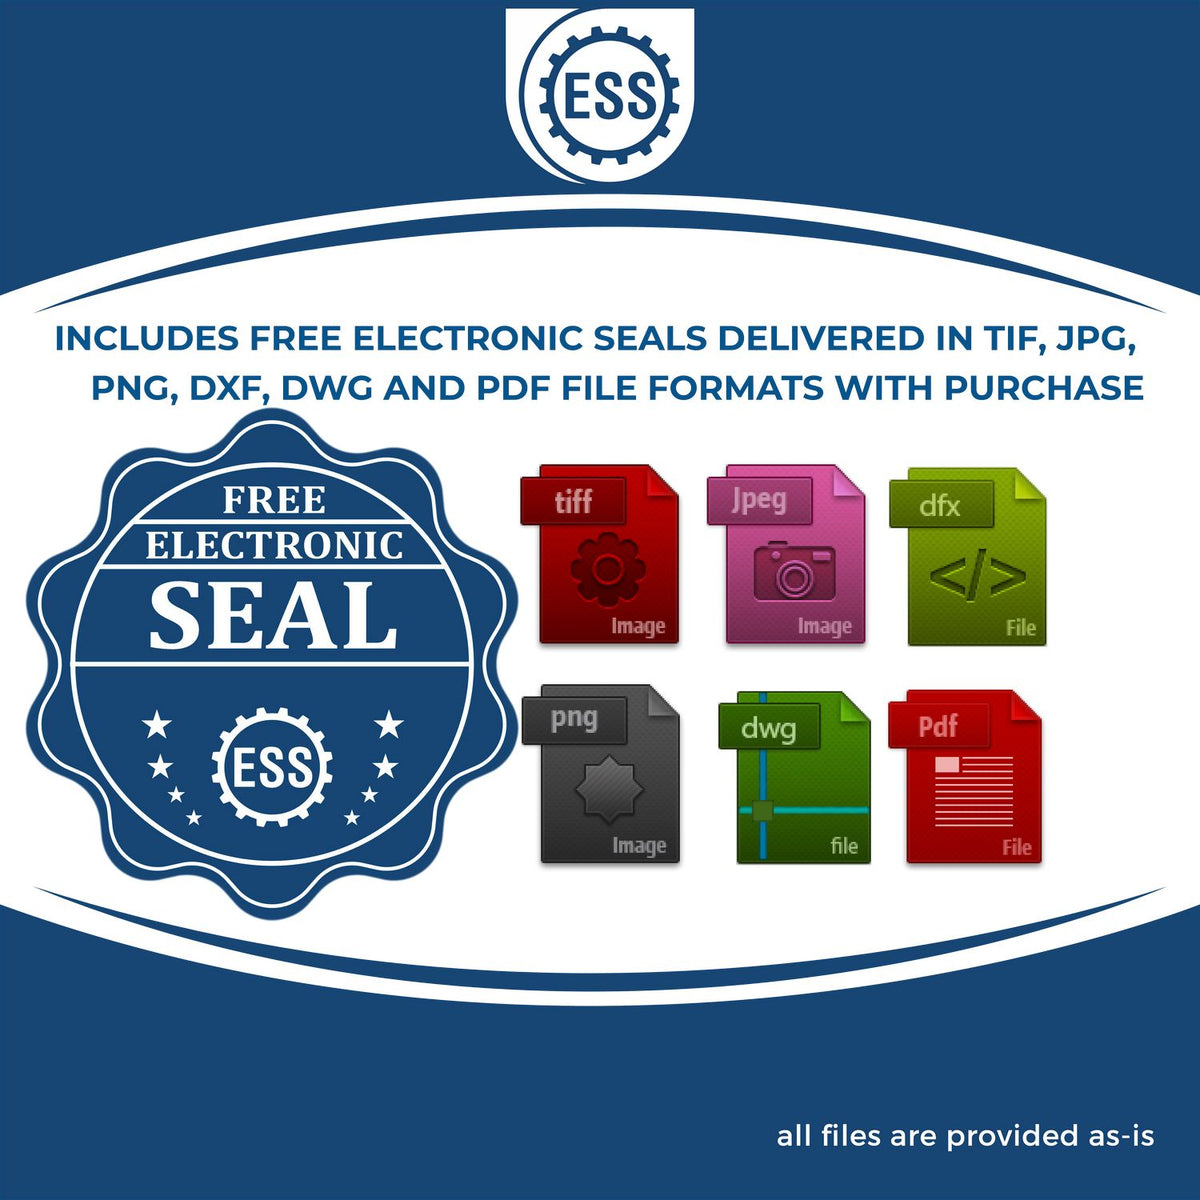 An infographic for the free electronic seal for the Self-Inking State Seal South Carolina Notary Stamp illustrating the different file type icons such as DXF, DWG, TIF, JPG and PNG.